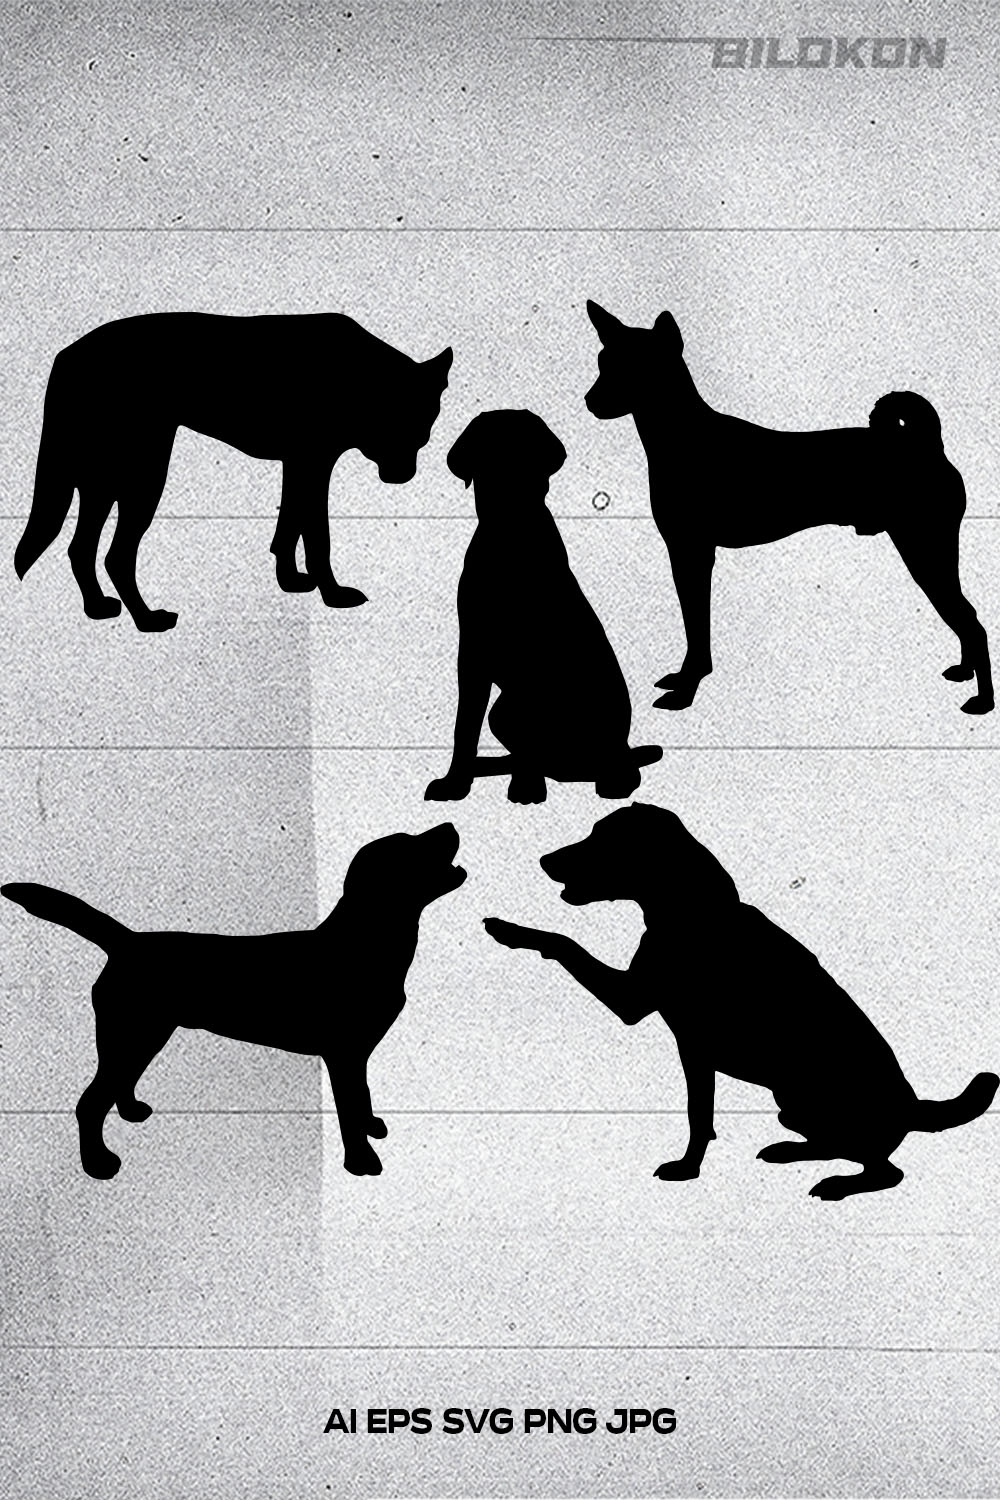 Black and white photo of a dog silhouettes.